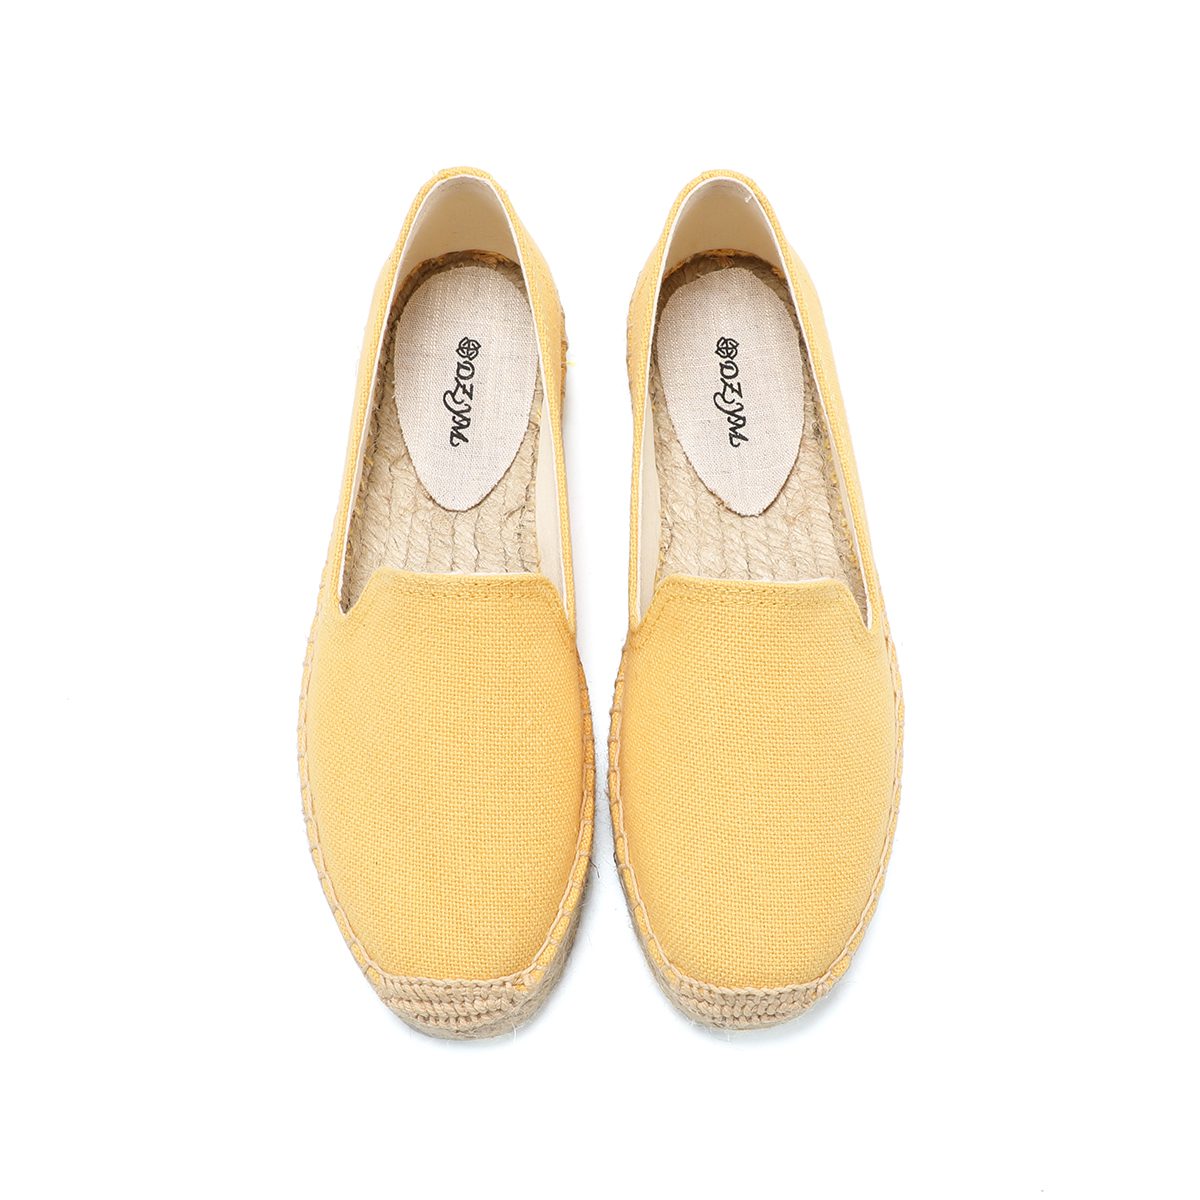 2021 New Arrival Rushed Casual Spring/autumn Hemp Round Toe Rubber Slip-on Solid Sapatos Zapatillas Mujer Espadrilles Flat